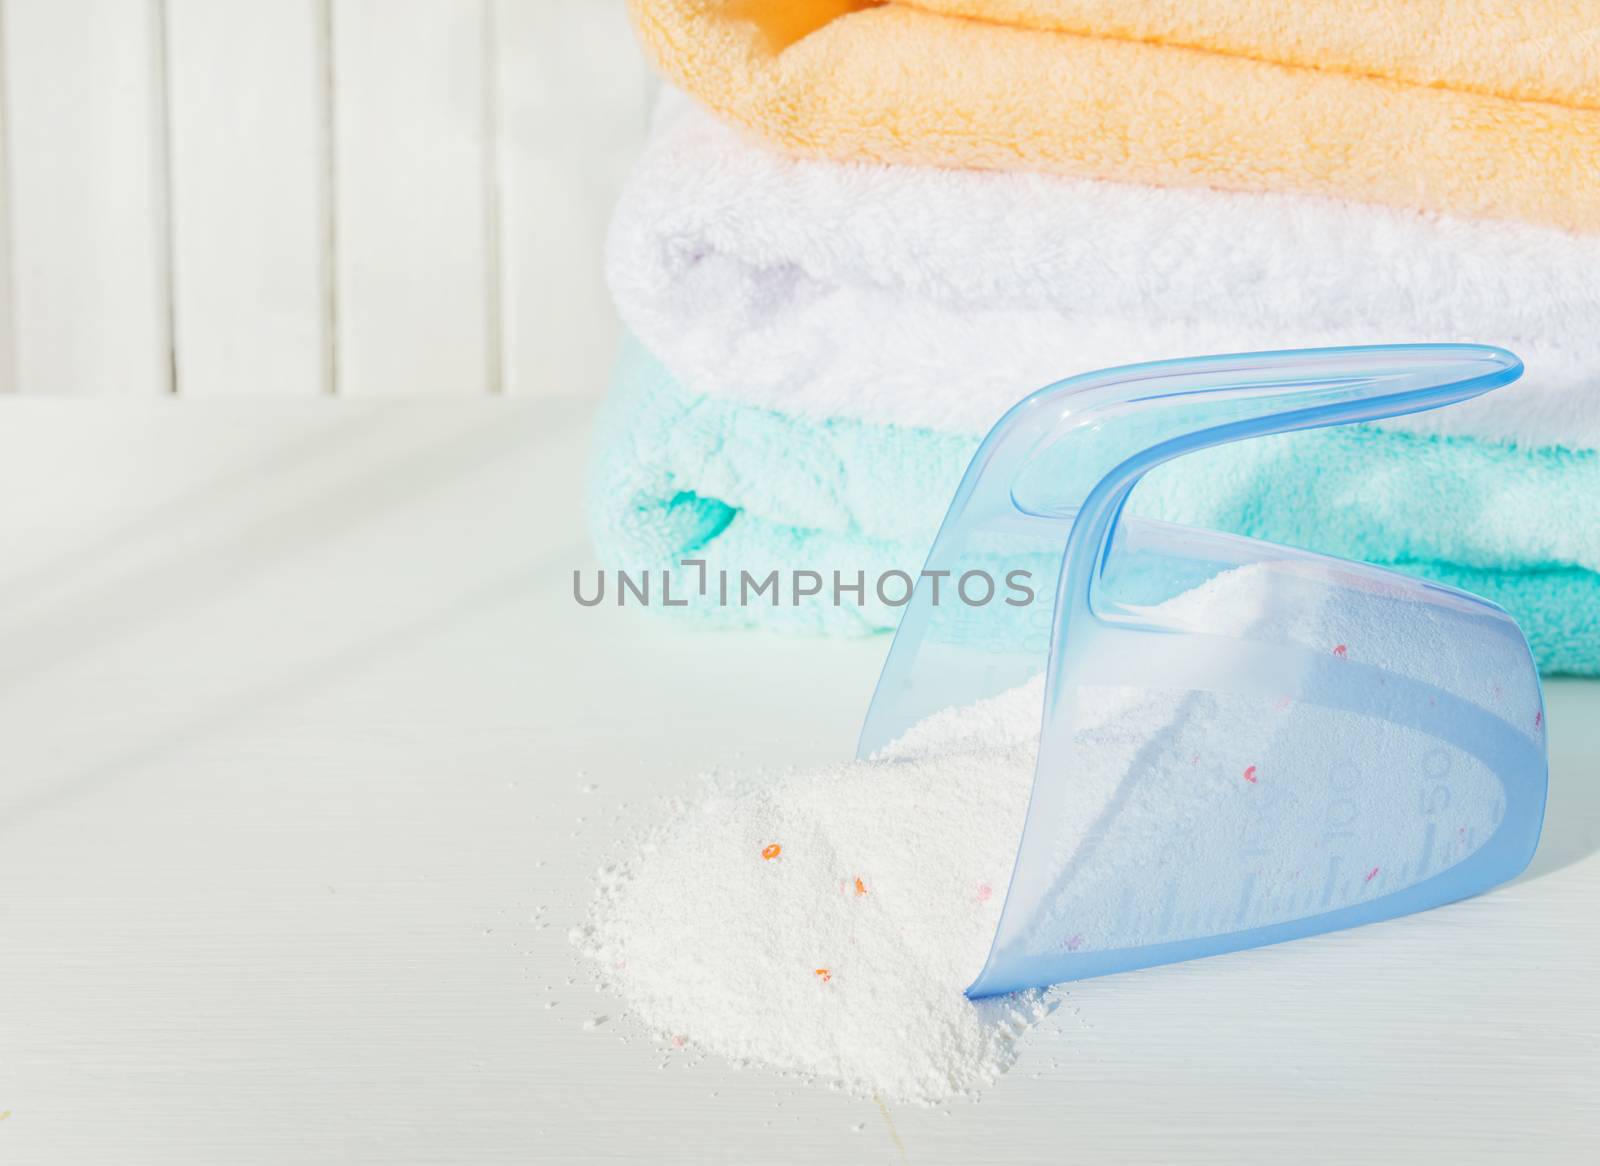 Stack of white, orange and blue fluffy bath towels and washing powder in measuring cup on the background of white boards